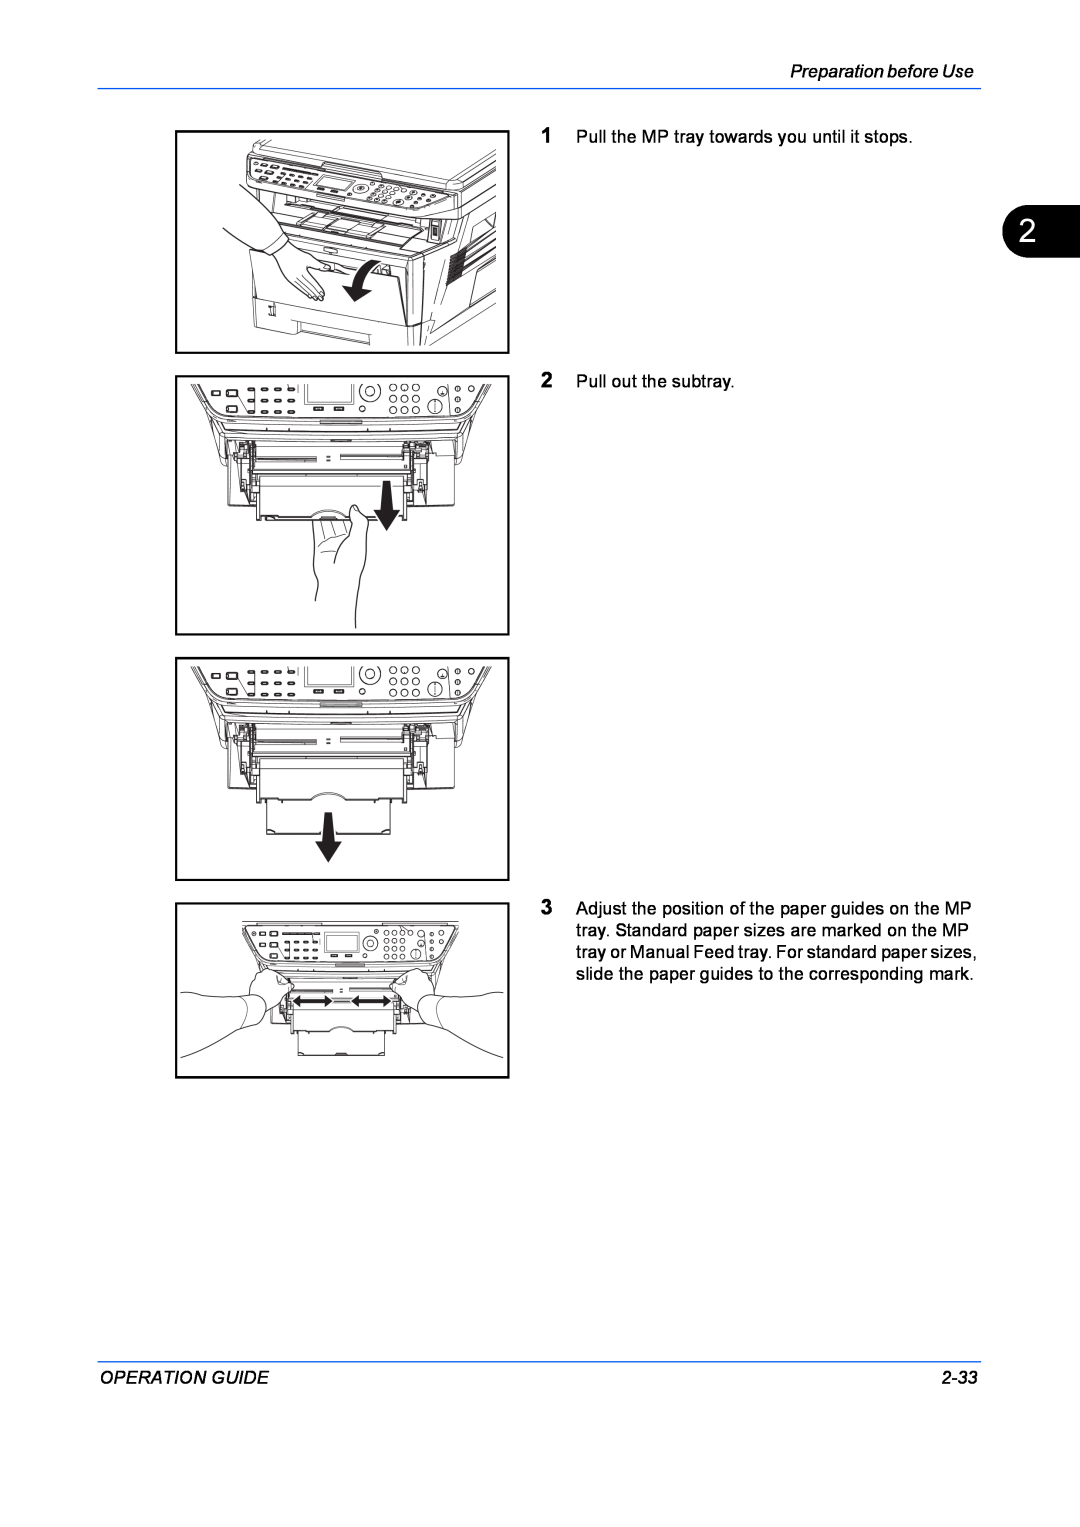 Kyocera FS-1128MFP manual Preparation before Use, Pull the MP tray towards you until it stops, Pull out the subtray, 2-33 